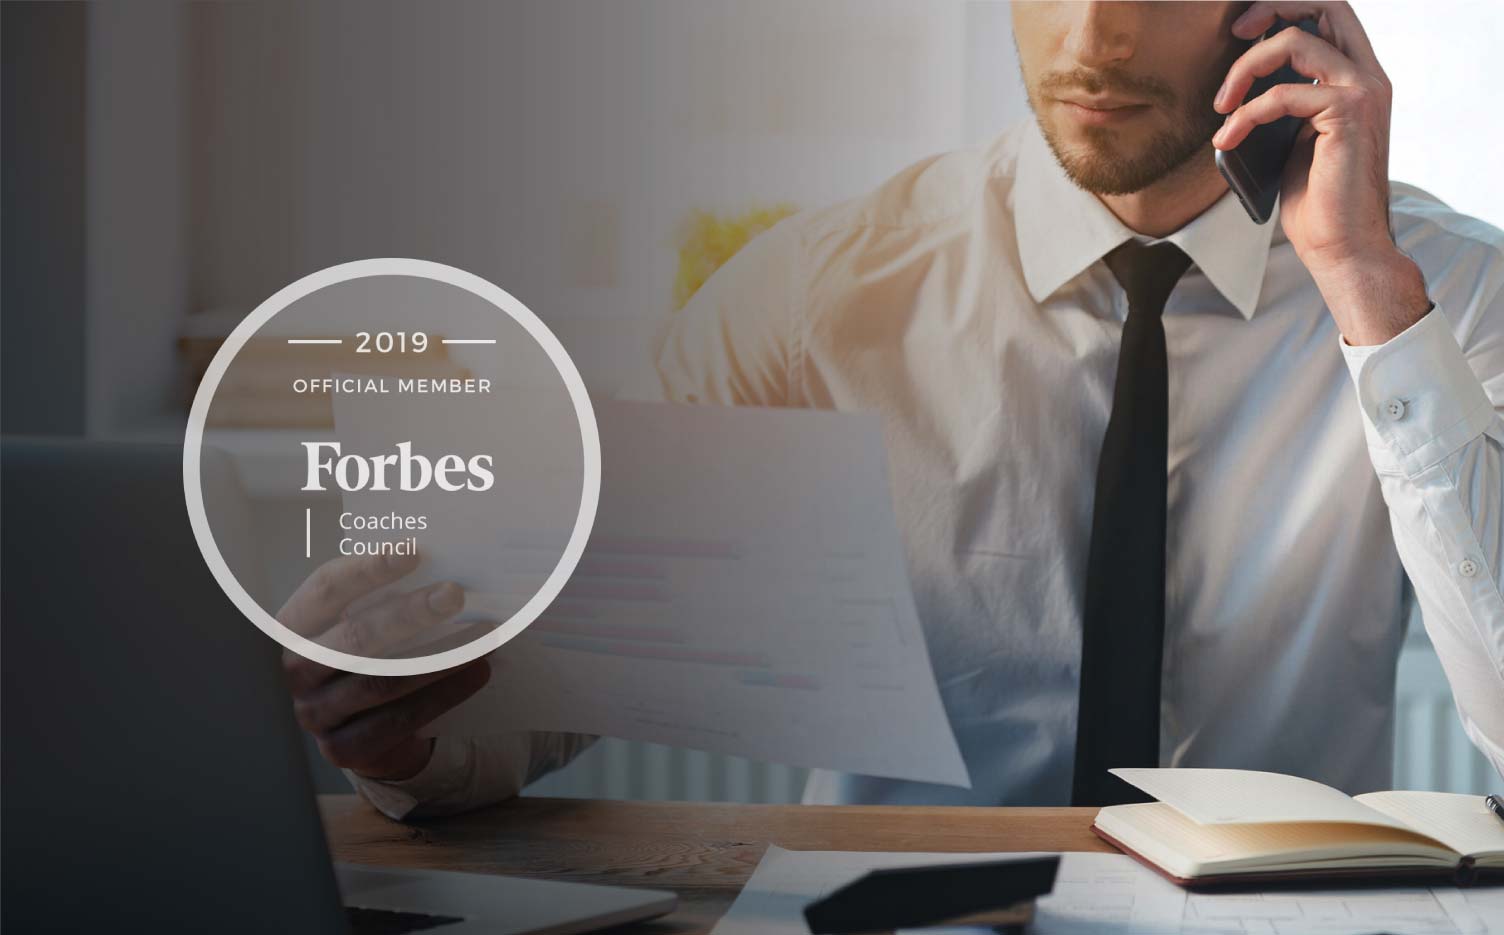 Jon Dwoskin's Forbes Coaches Council Article: Seven Practices For Growing Your Business, People And Soul